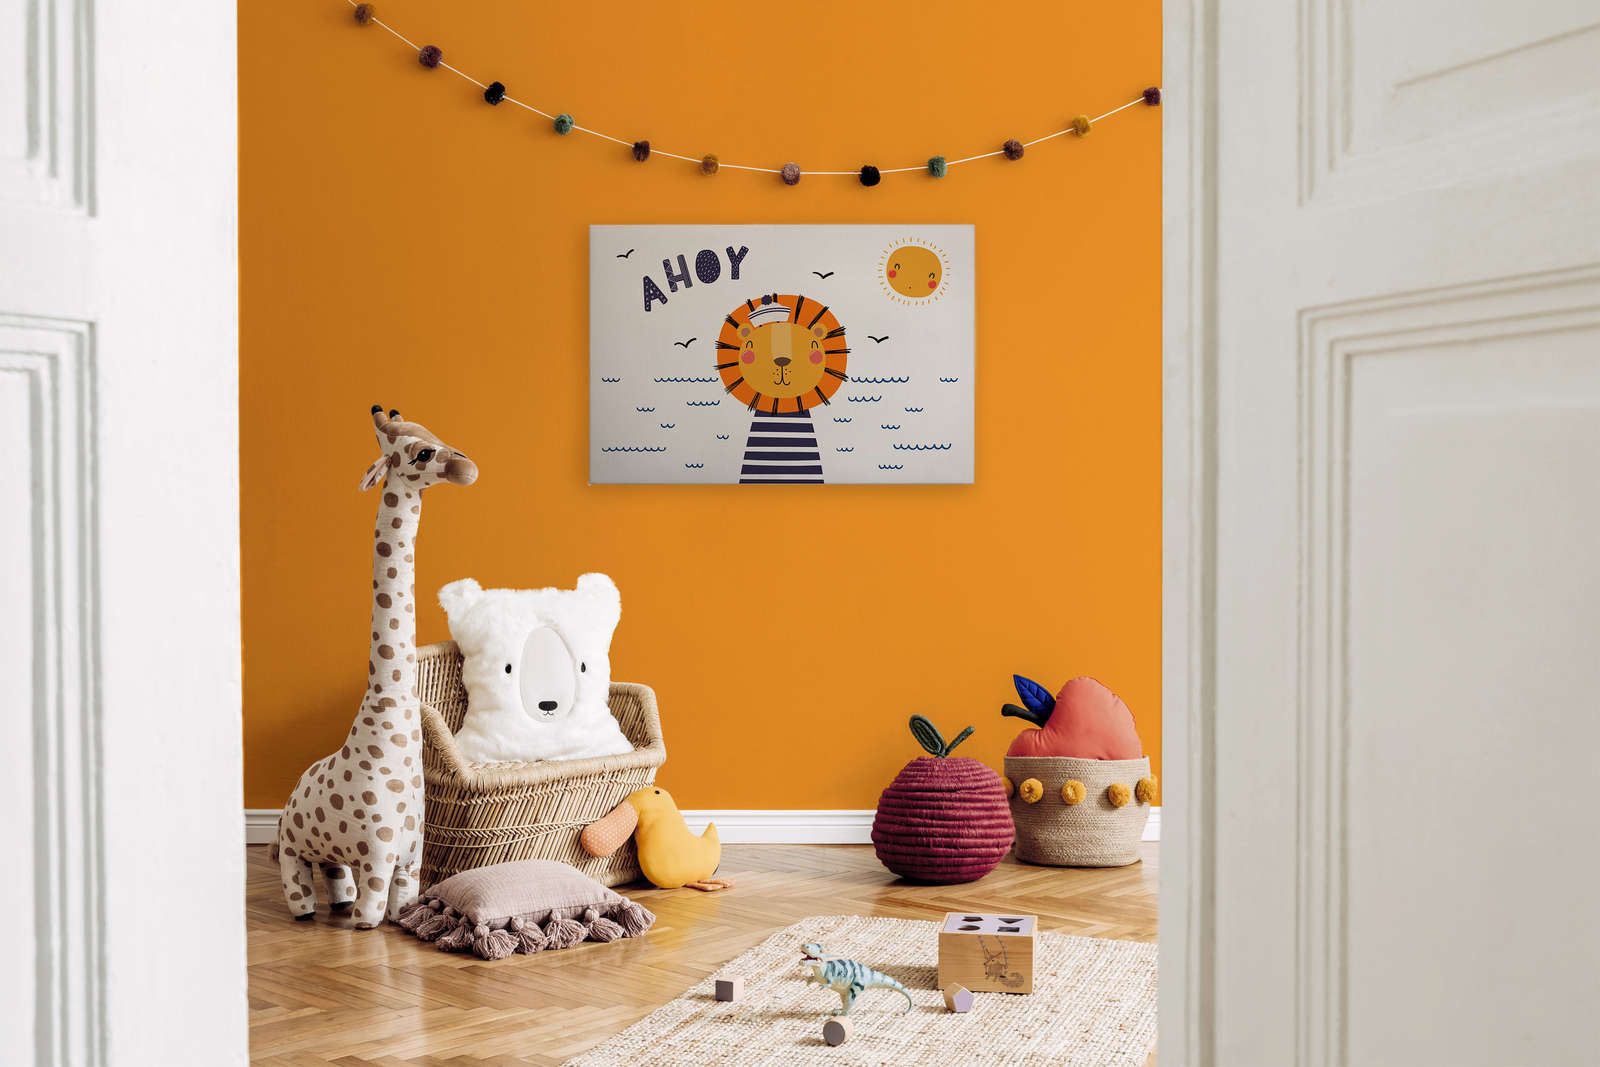             Canvas for Children's Room with Lion Pirate - 90 cm x 60 cm
        